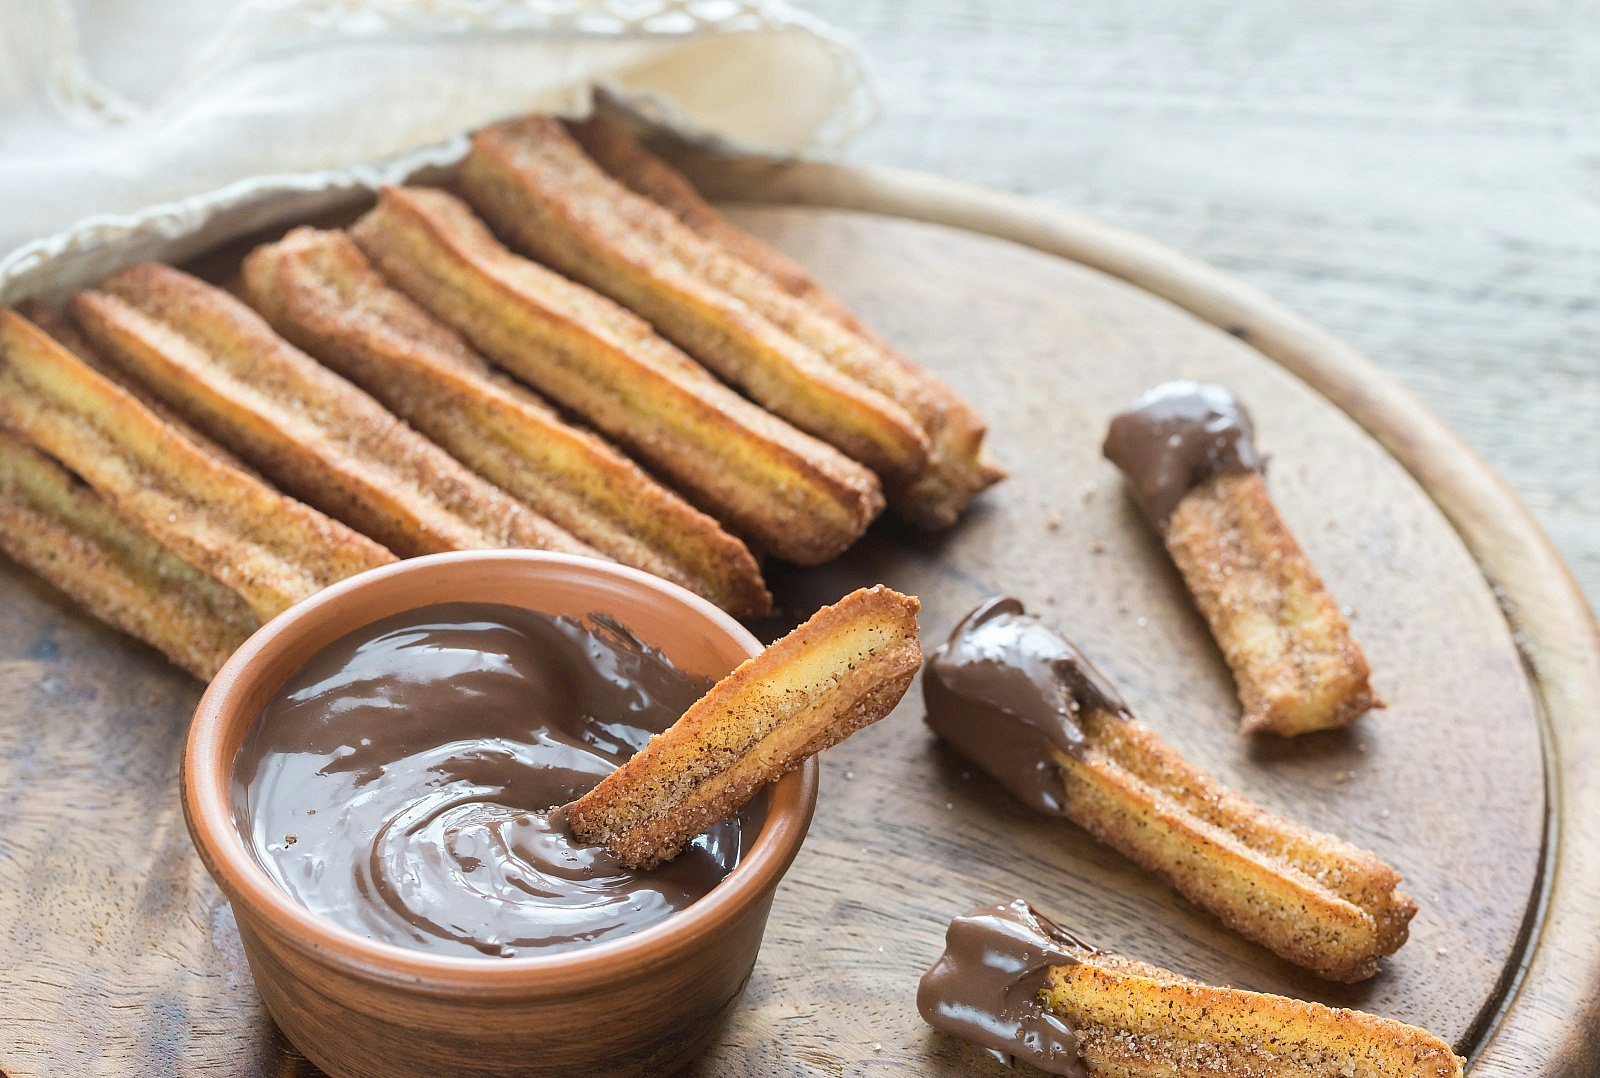 Churros - deep-fried strips of dough - on a circular chopping board on a table next to a pot of chocolate dipping sauce. A few of the churros have already been dipped in the sauce.